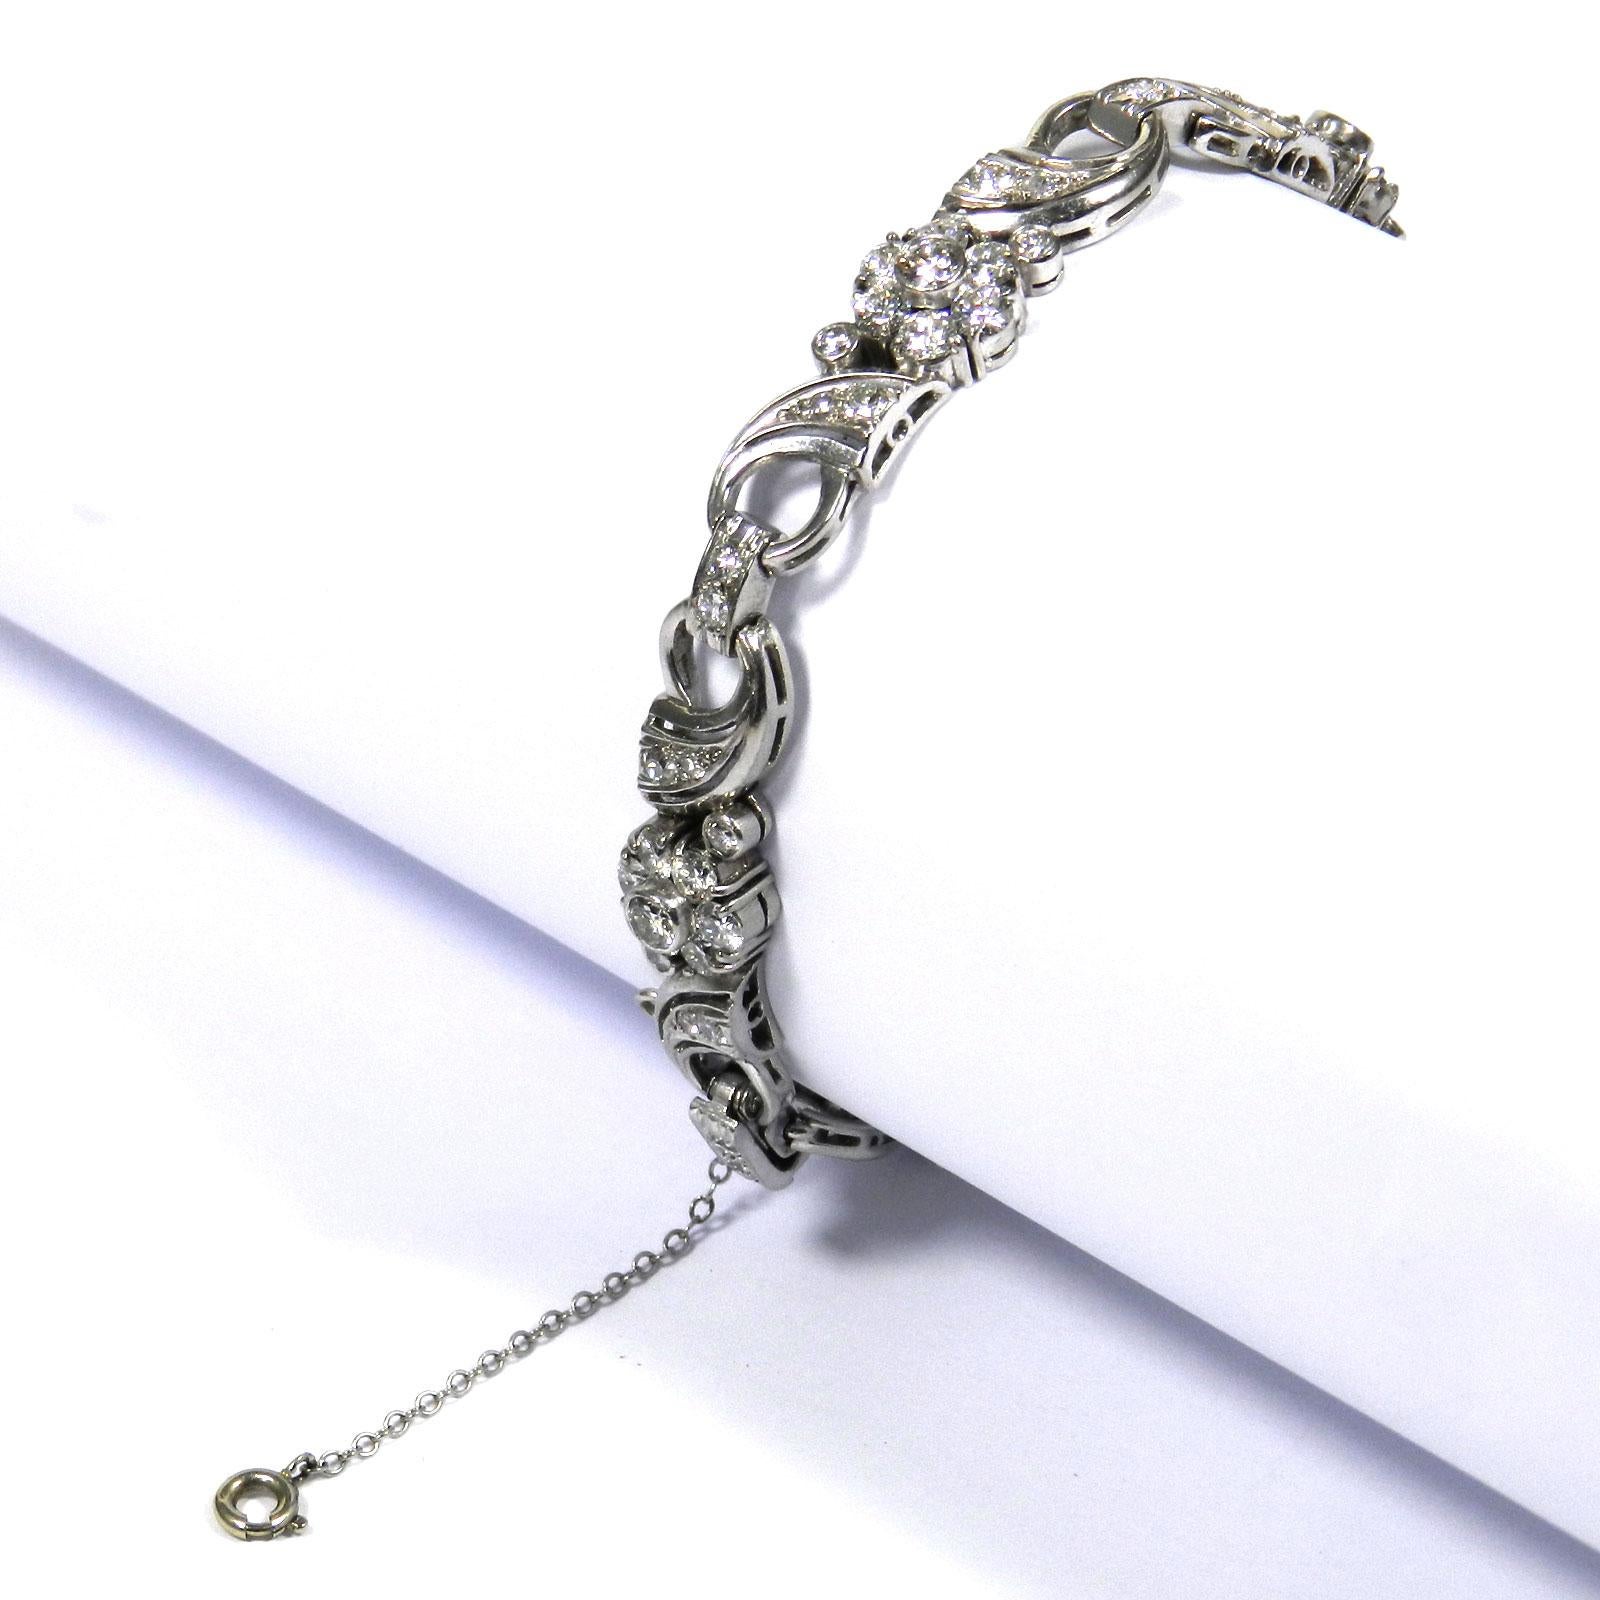 4.5 carat diamond white gold link bracelet 

This elegant diamond bracelet is designed with five rectangular links decorated with flower and leaf motifs and inter-connected with bar-shaped segments, set with a total of 75 sparkling diamonds weighing